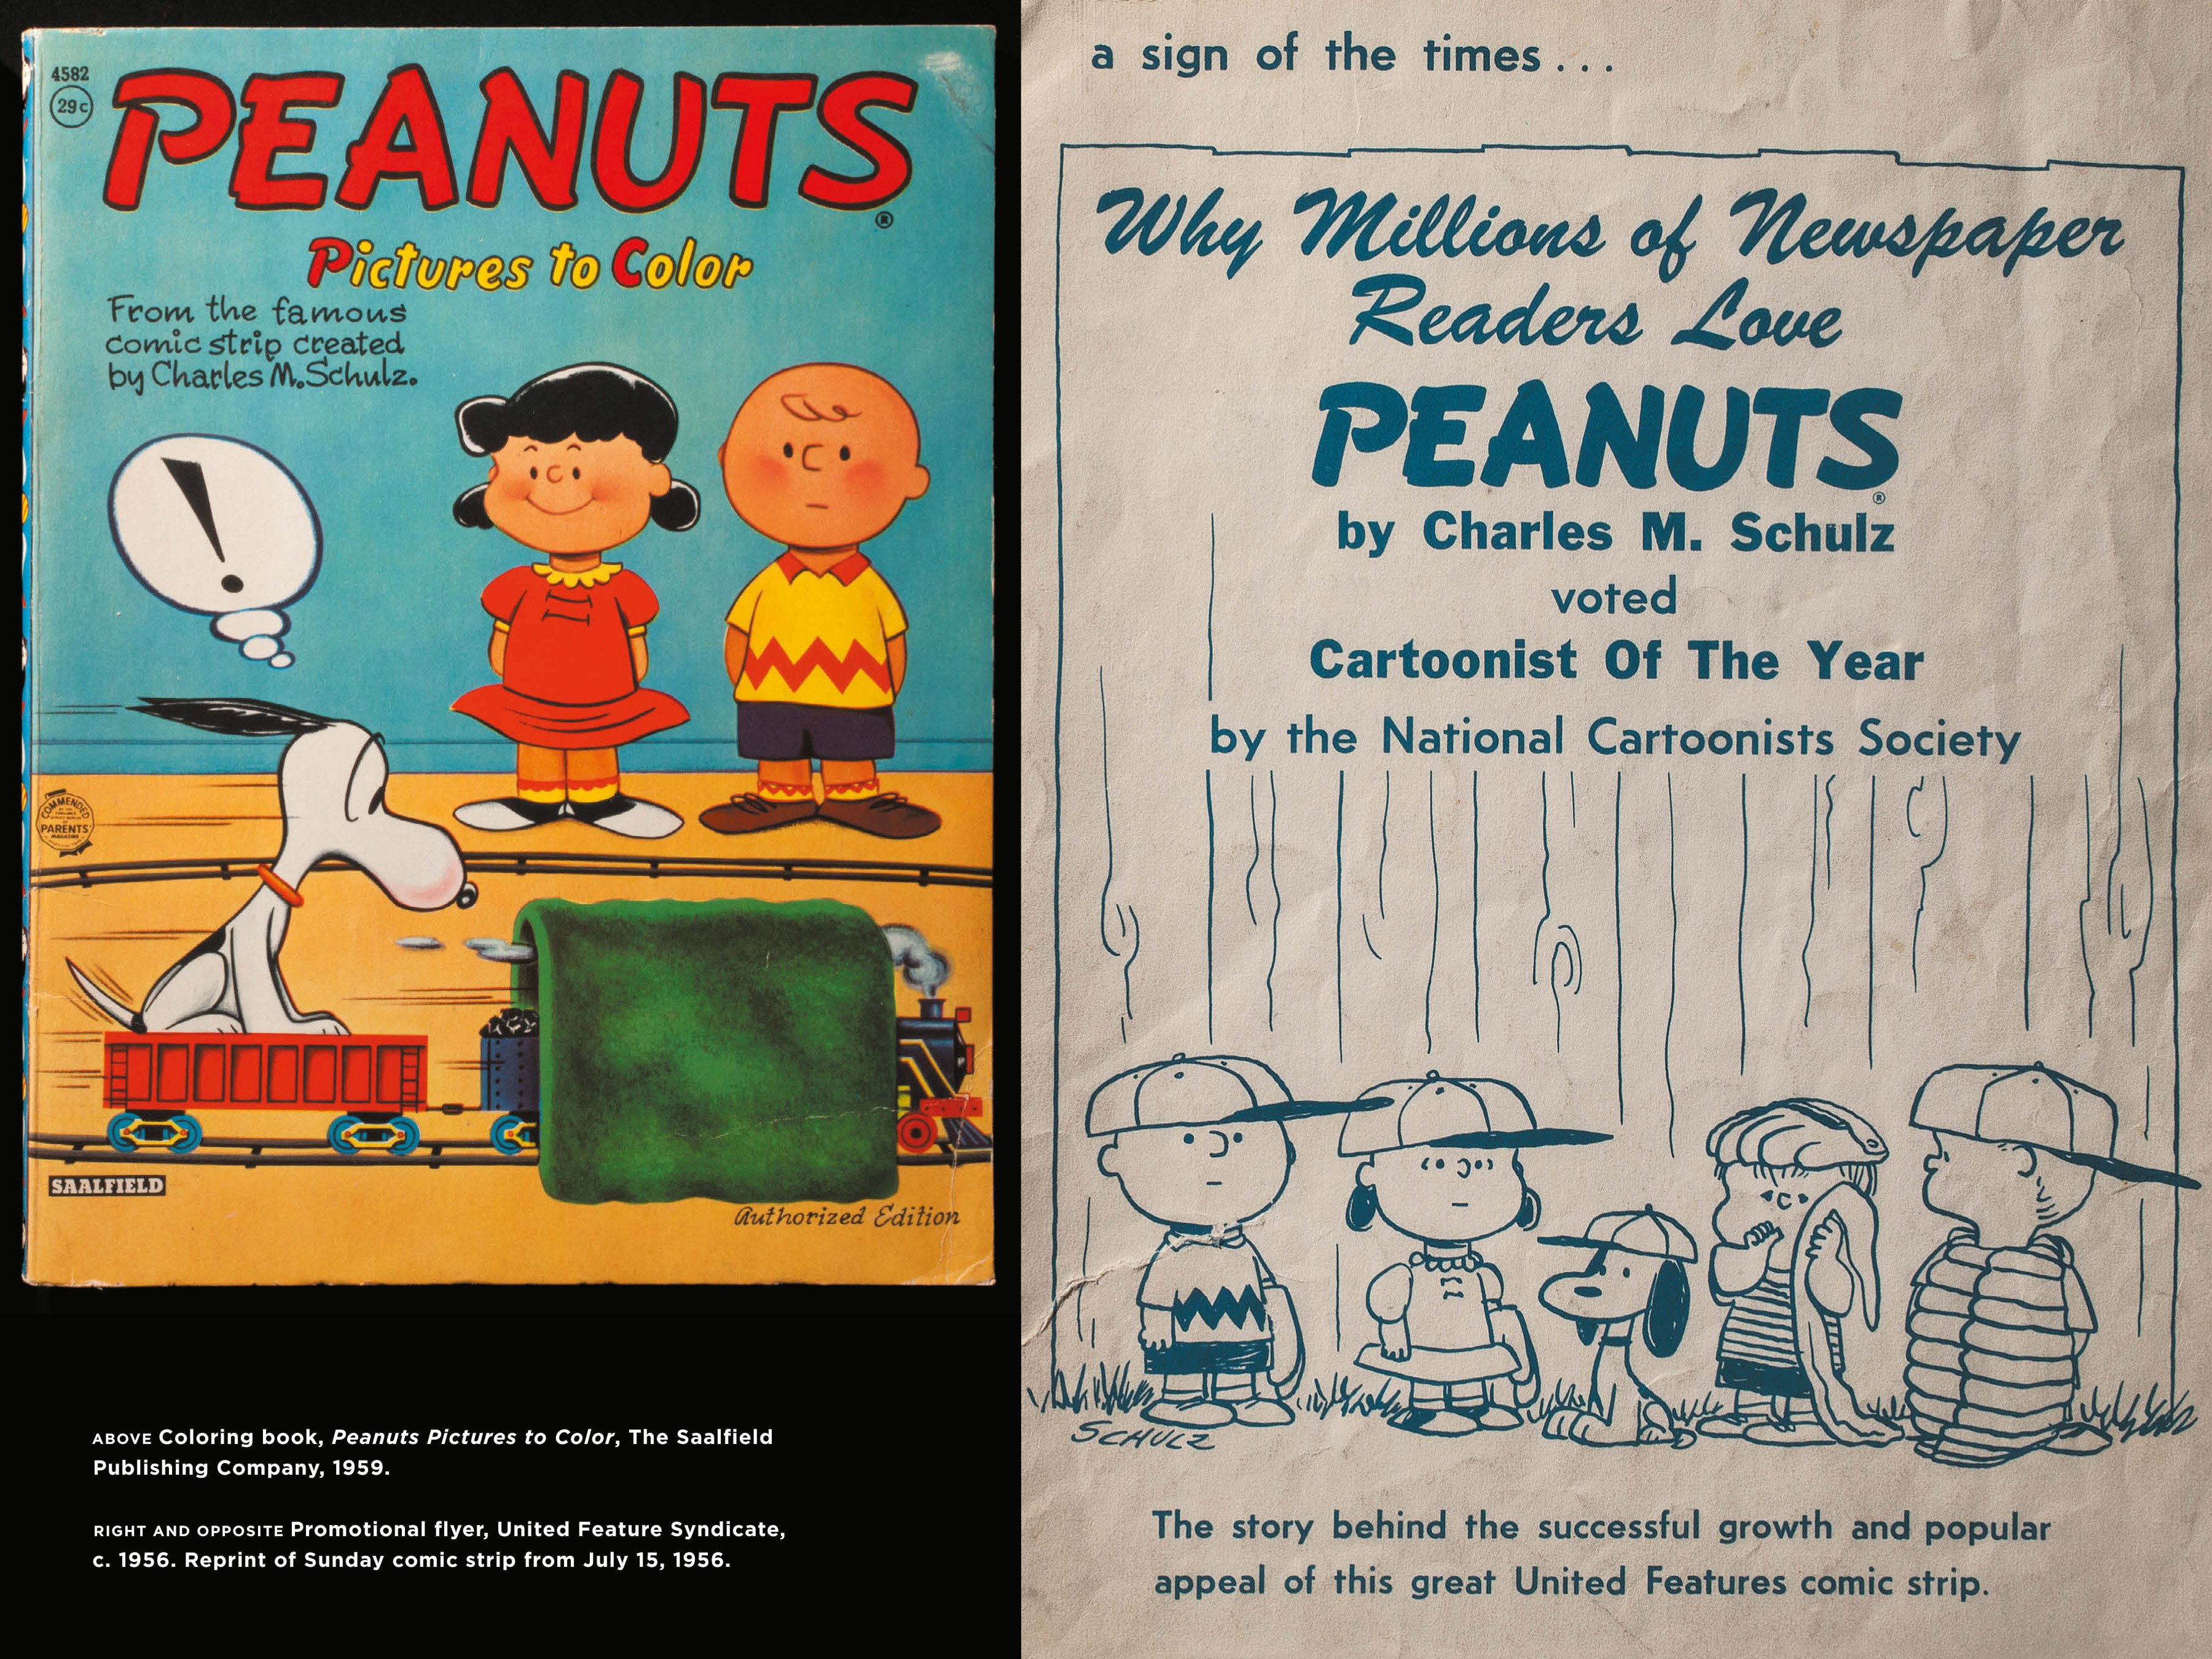 Read online Only What's Necessary: Charles M. Schulz and the Art of Peanuts comic -  Issue # TPB (Part 2) - 17